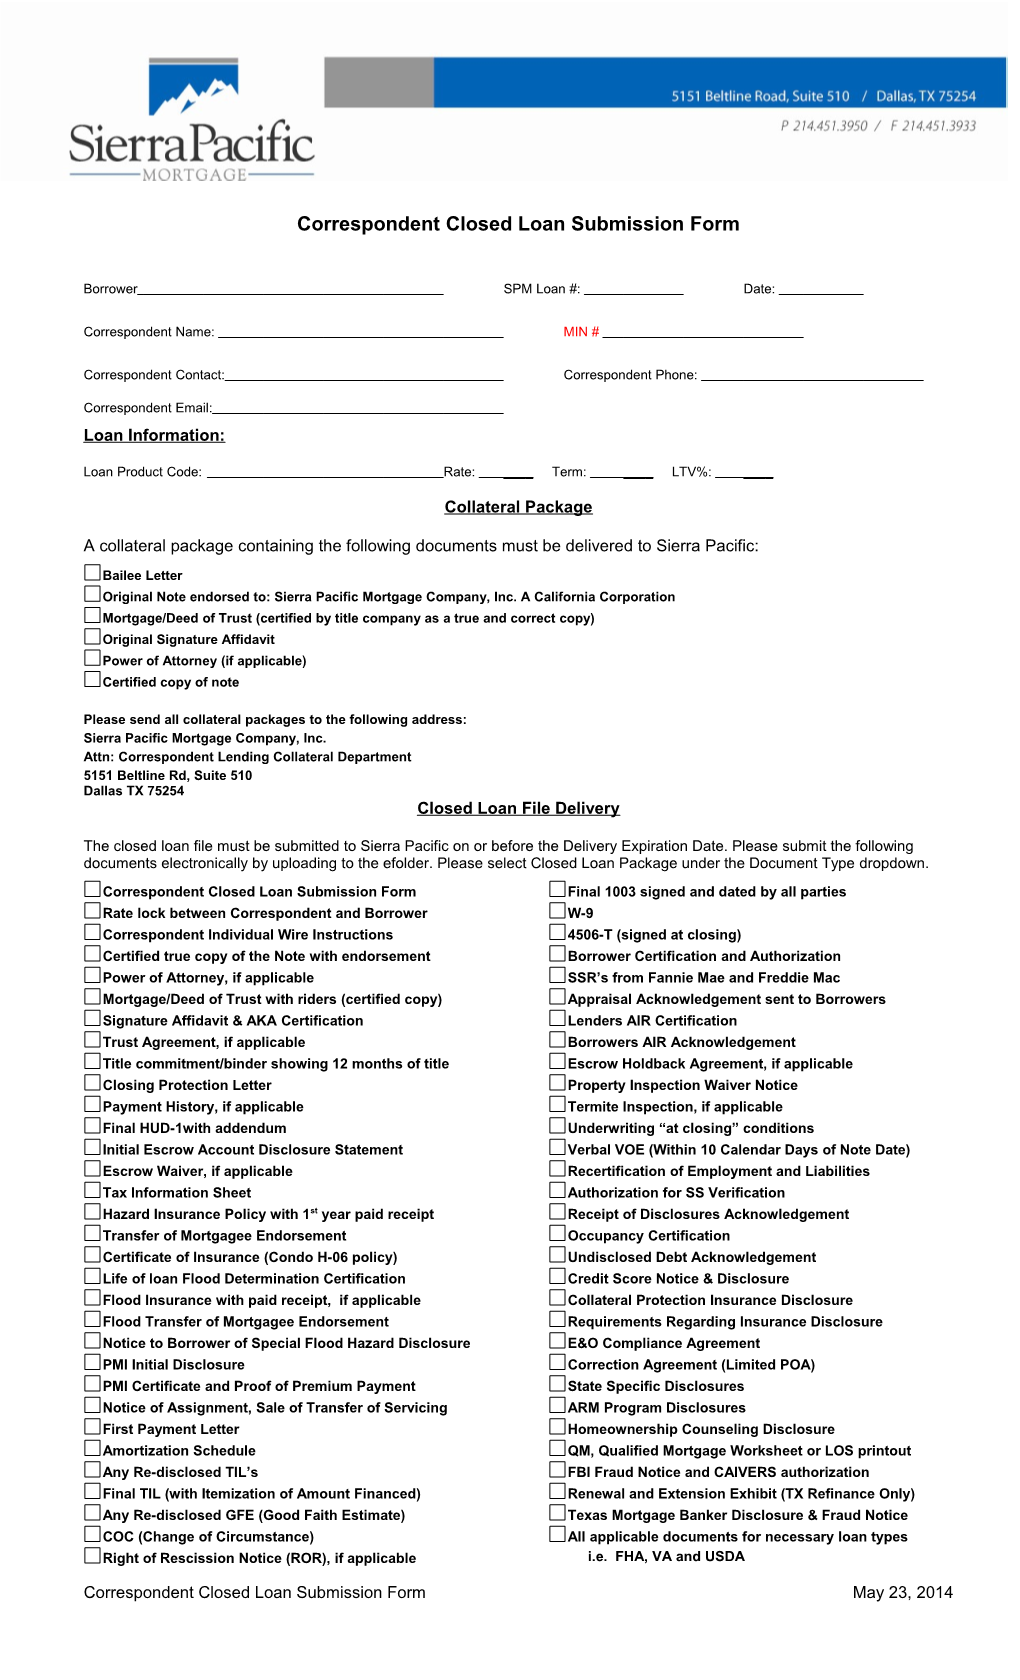 Correspondent Closed Loan Submission Form